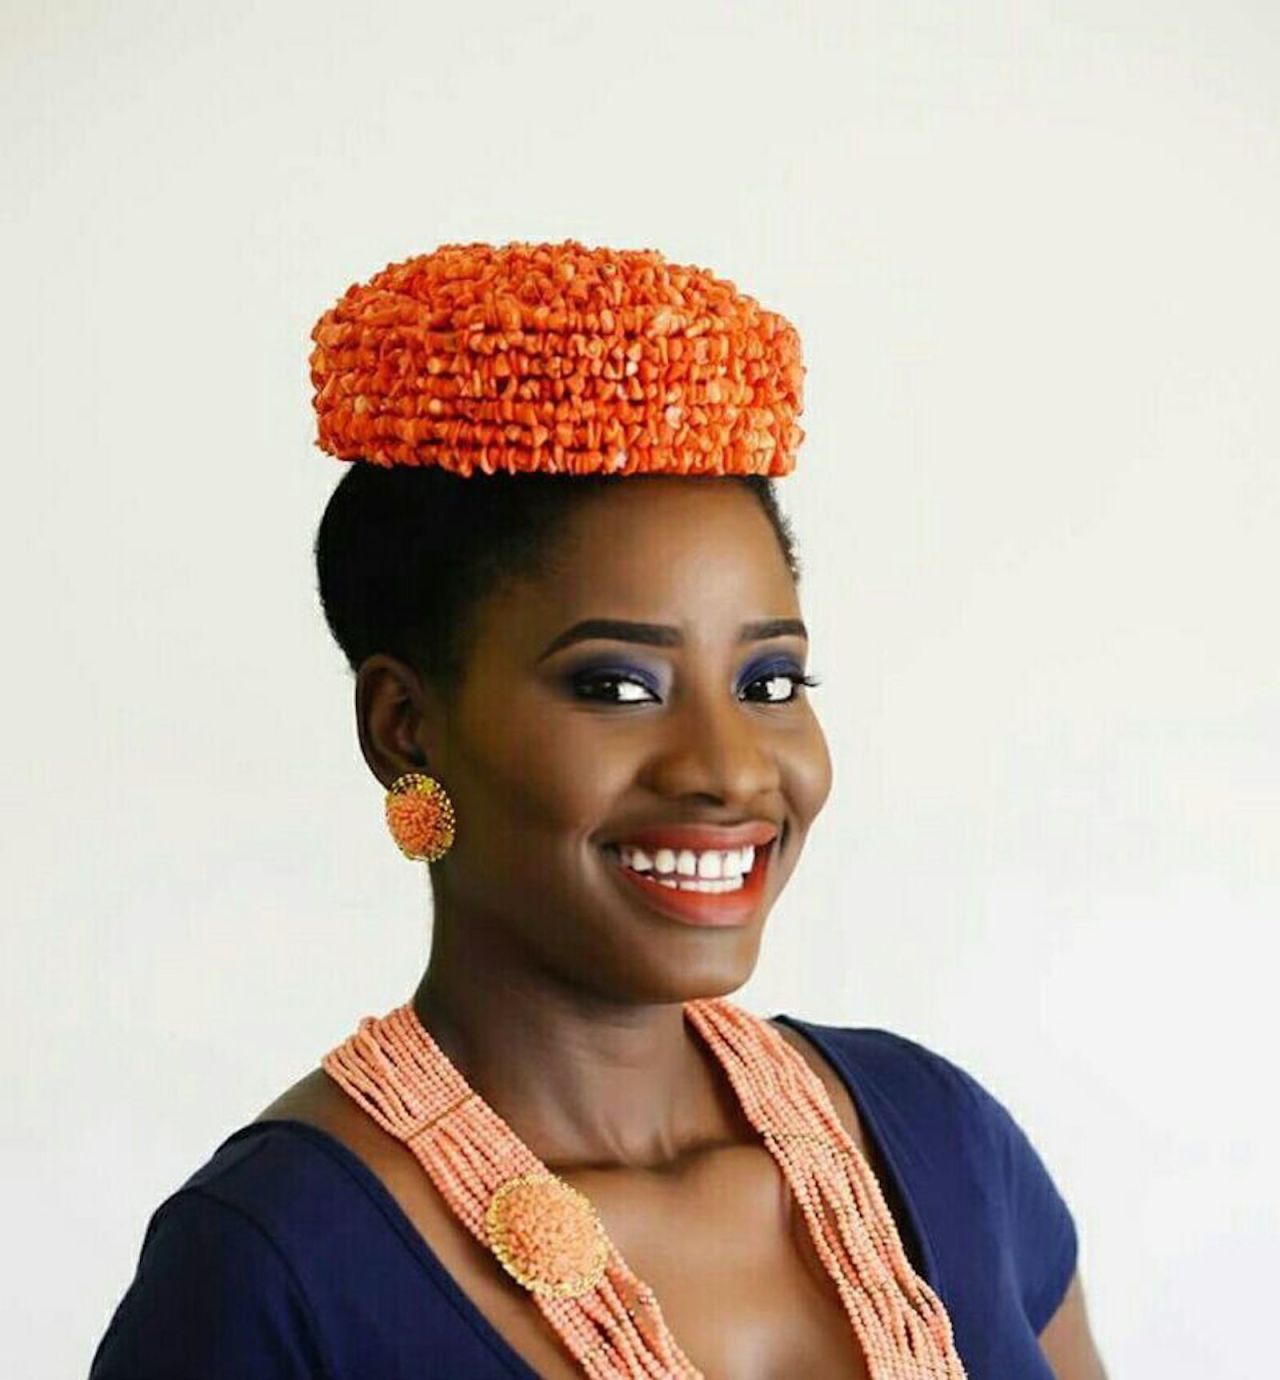 Nigerian Olatorera Oniru is the founder of Dress Me Outlet, a site she left a corporate career in banking and tech to set up. Based in Lagos, the site sells around 85 to 95 percent of its fashion products to Nigerians. <br /><br />"Africa currently does not have a 1% share in the global fashion industry GDP which I think is very poor considering the fact that the majority of fashion's natural resources come from the continent, from gold to diamond to cotton even leather so it's only right that we have a share," says 30-year-old Oniru. <br /><br />Pictured: Dress Me Outlet founder Olatorera Oniru.